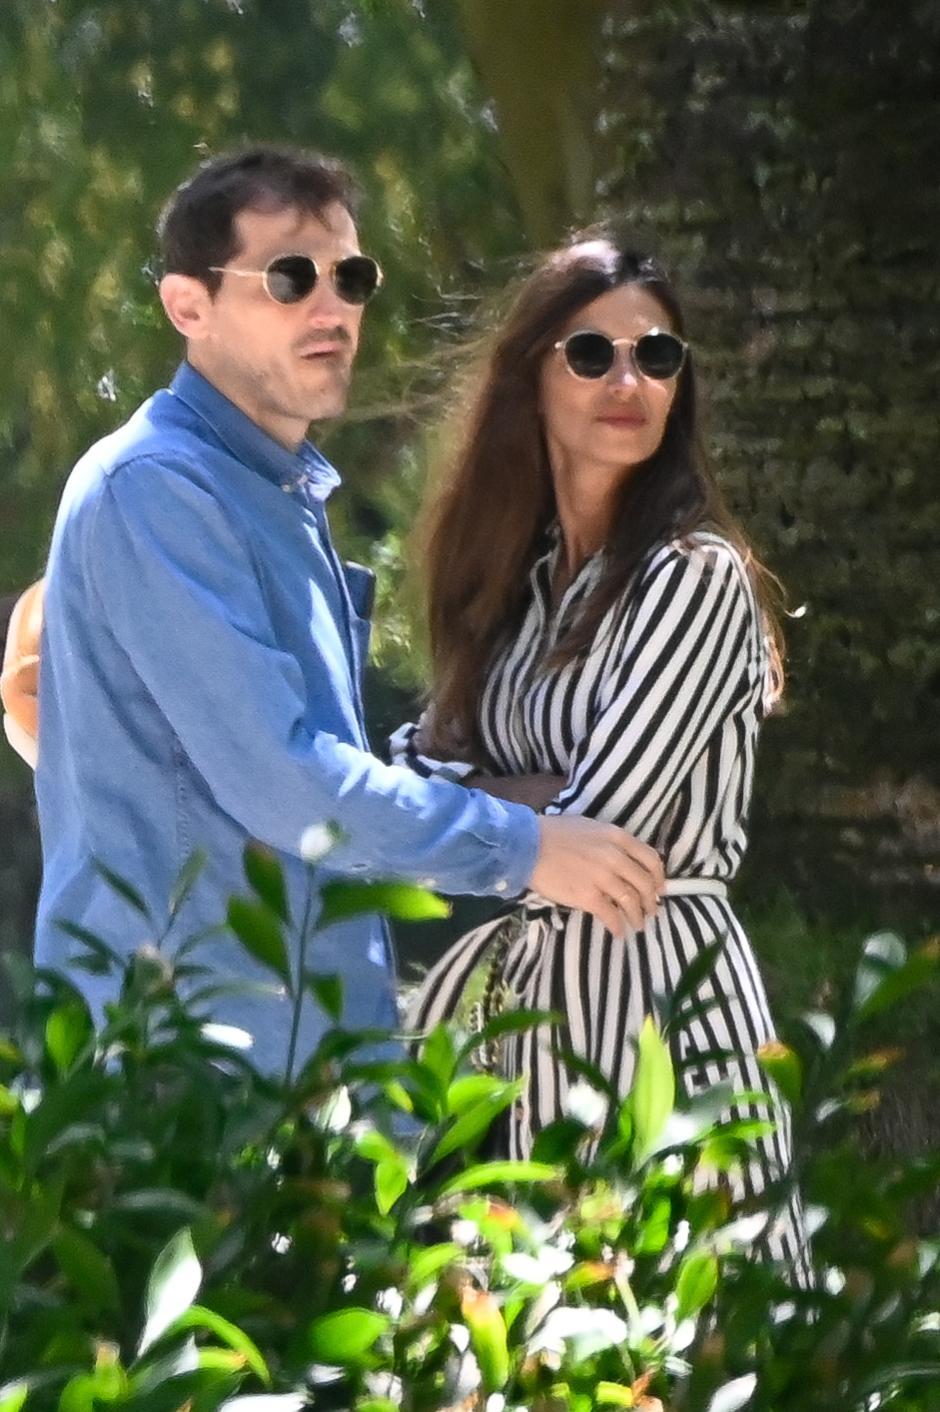 Soccerplayer Iker Casillas and Sara Carbonero in Oporto on Sunday, 12th May 2019